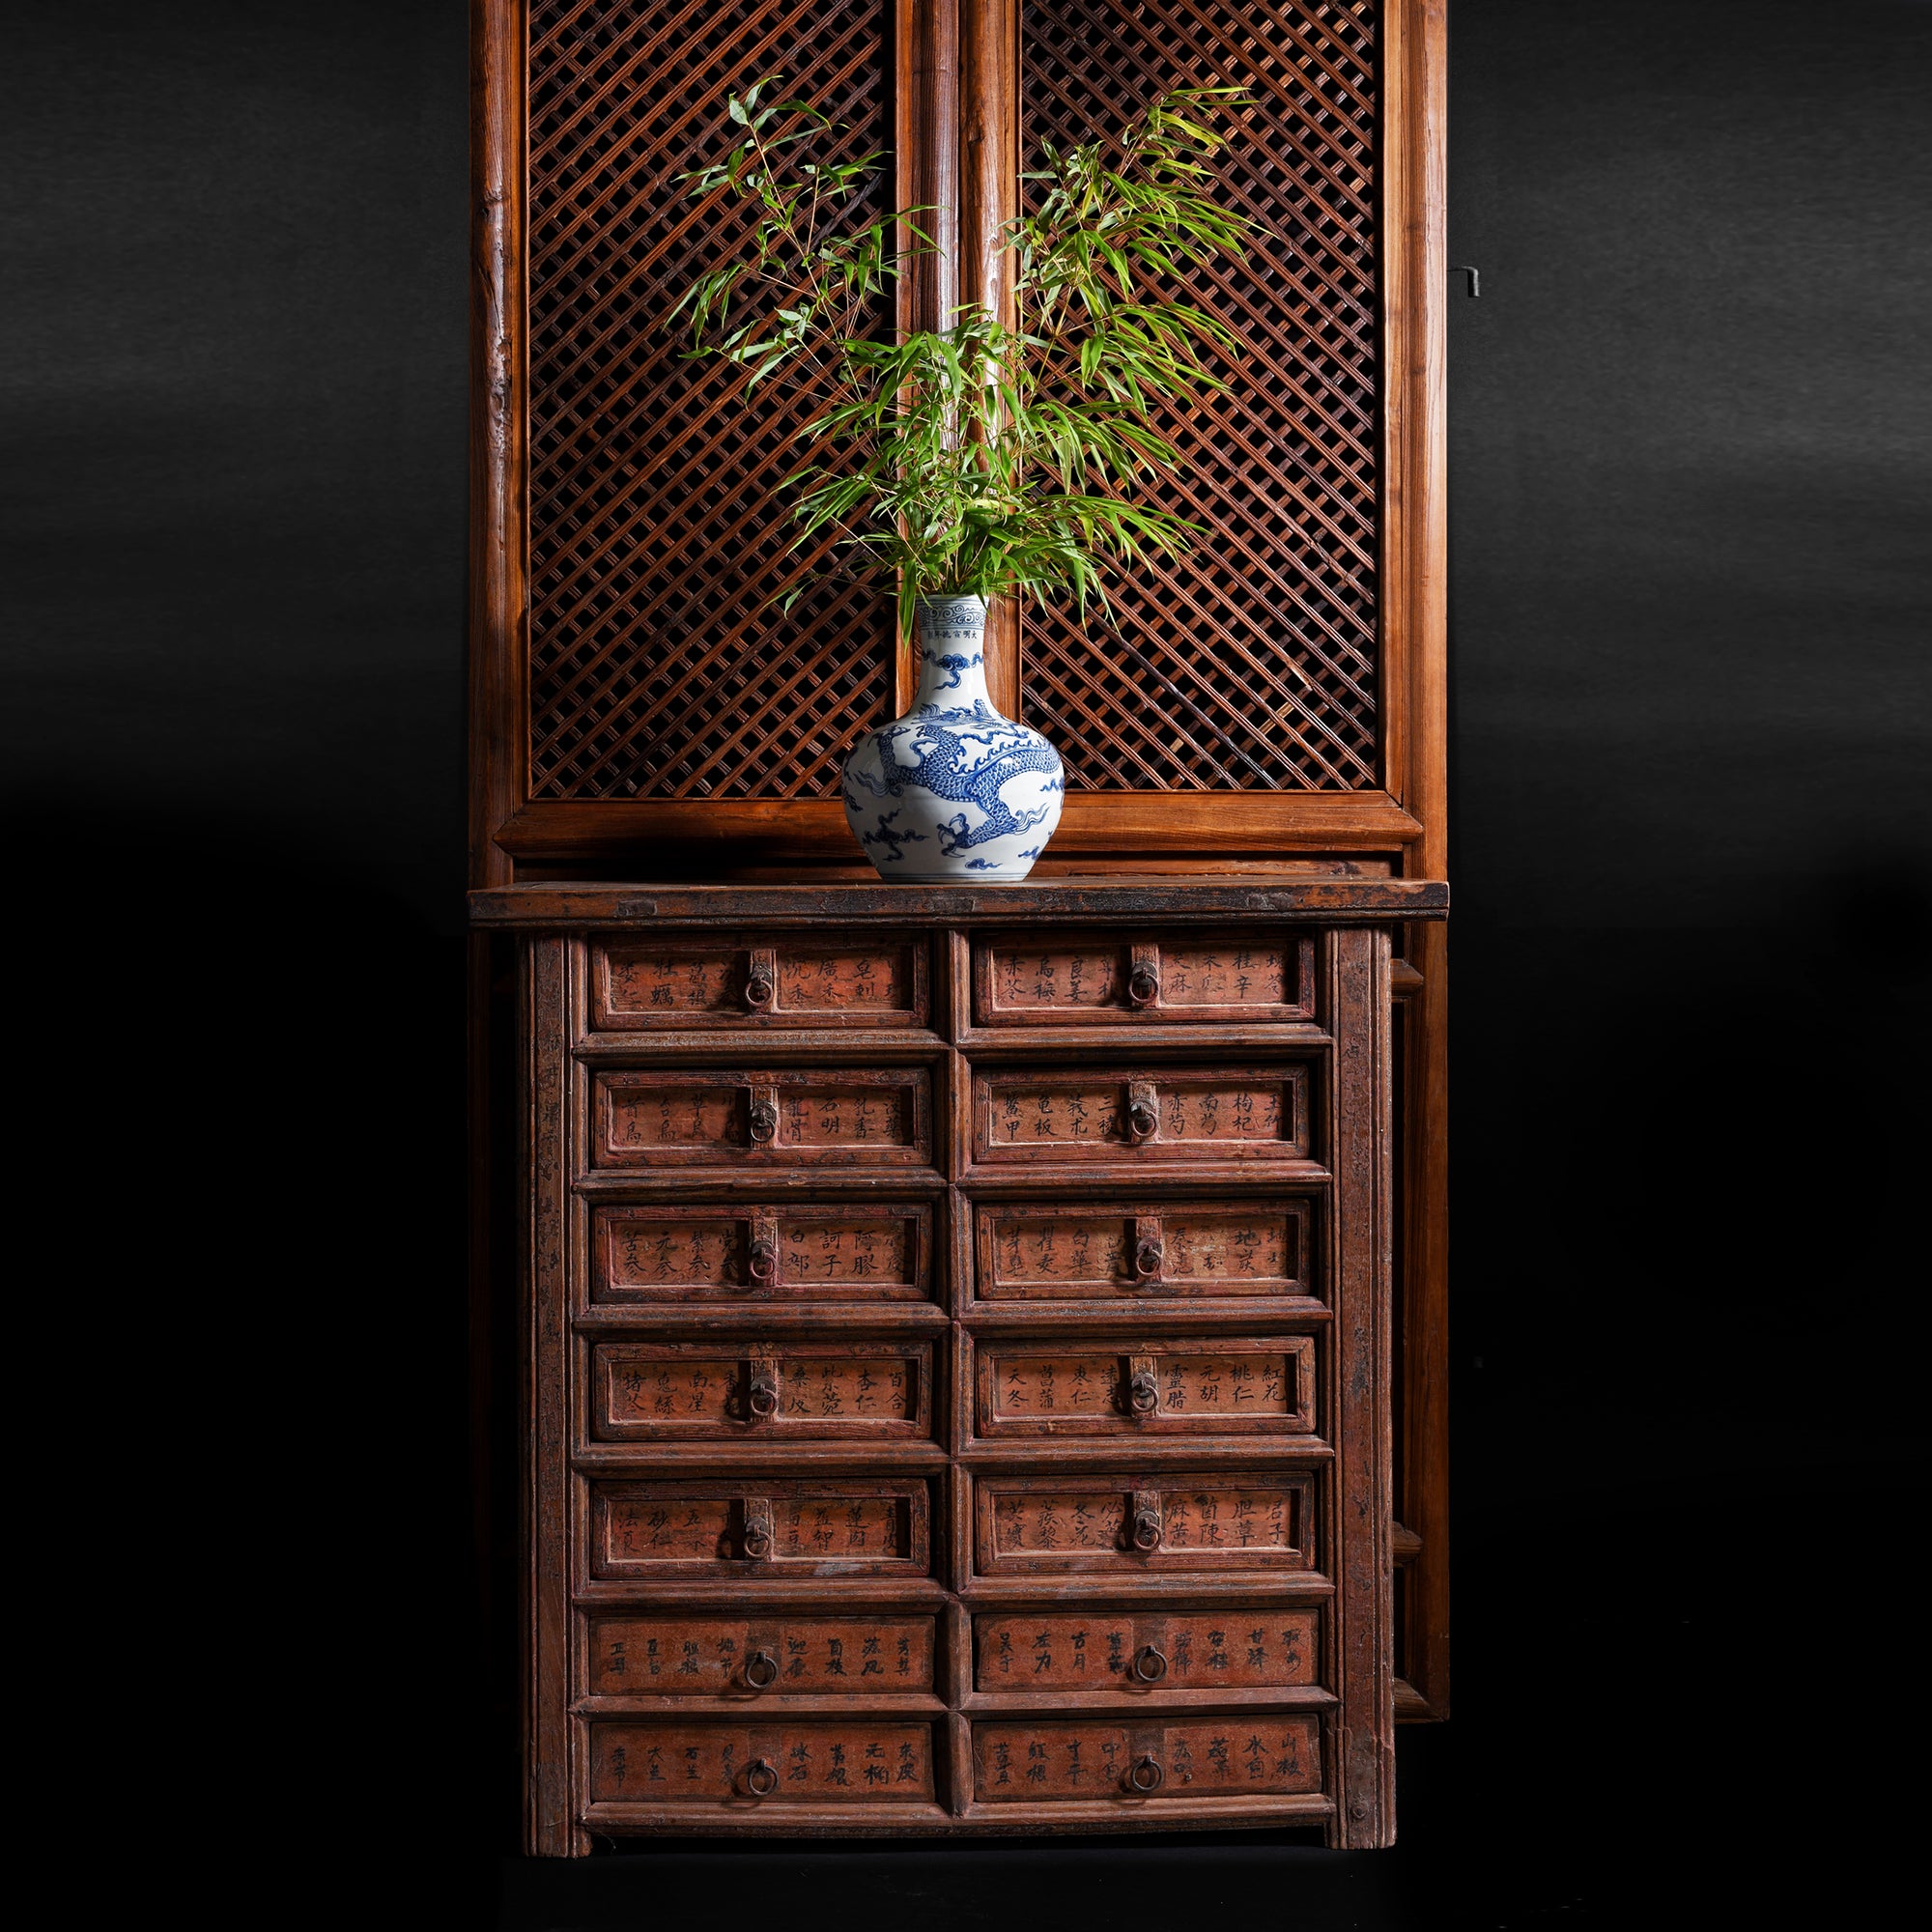 Chinese Apothecary Cabinets